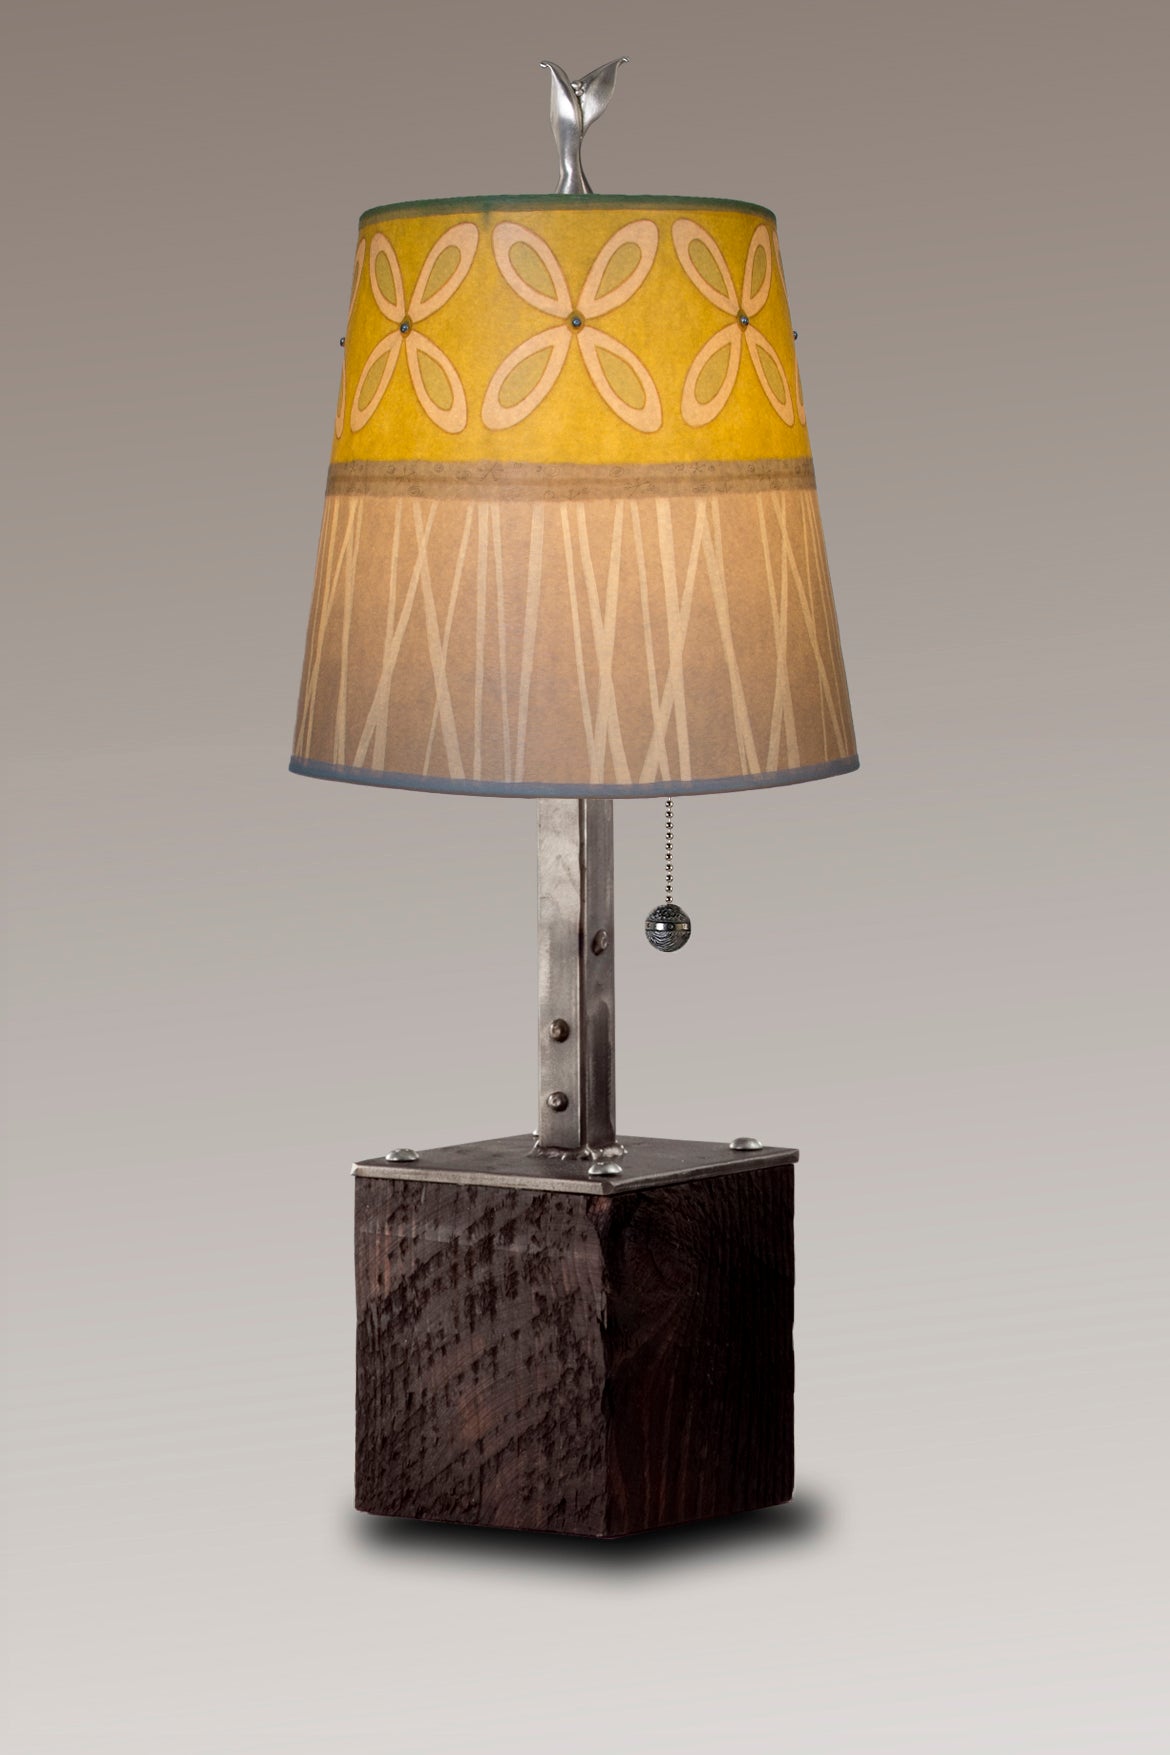 Janna Ugone & Co Table Lamps Steel Table Lamp on Reclaimed Wood with Small Drum Shade in Kiwi